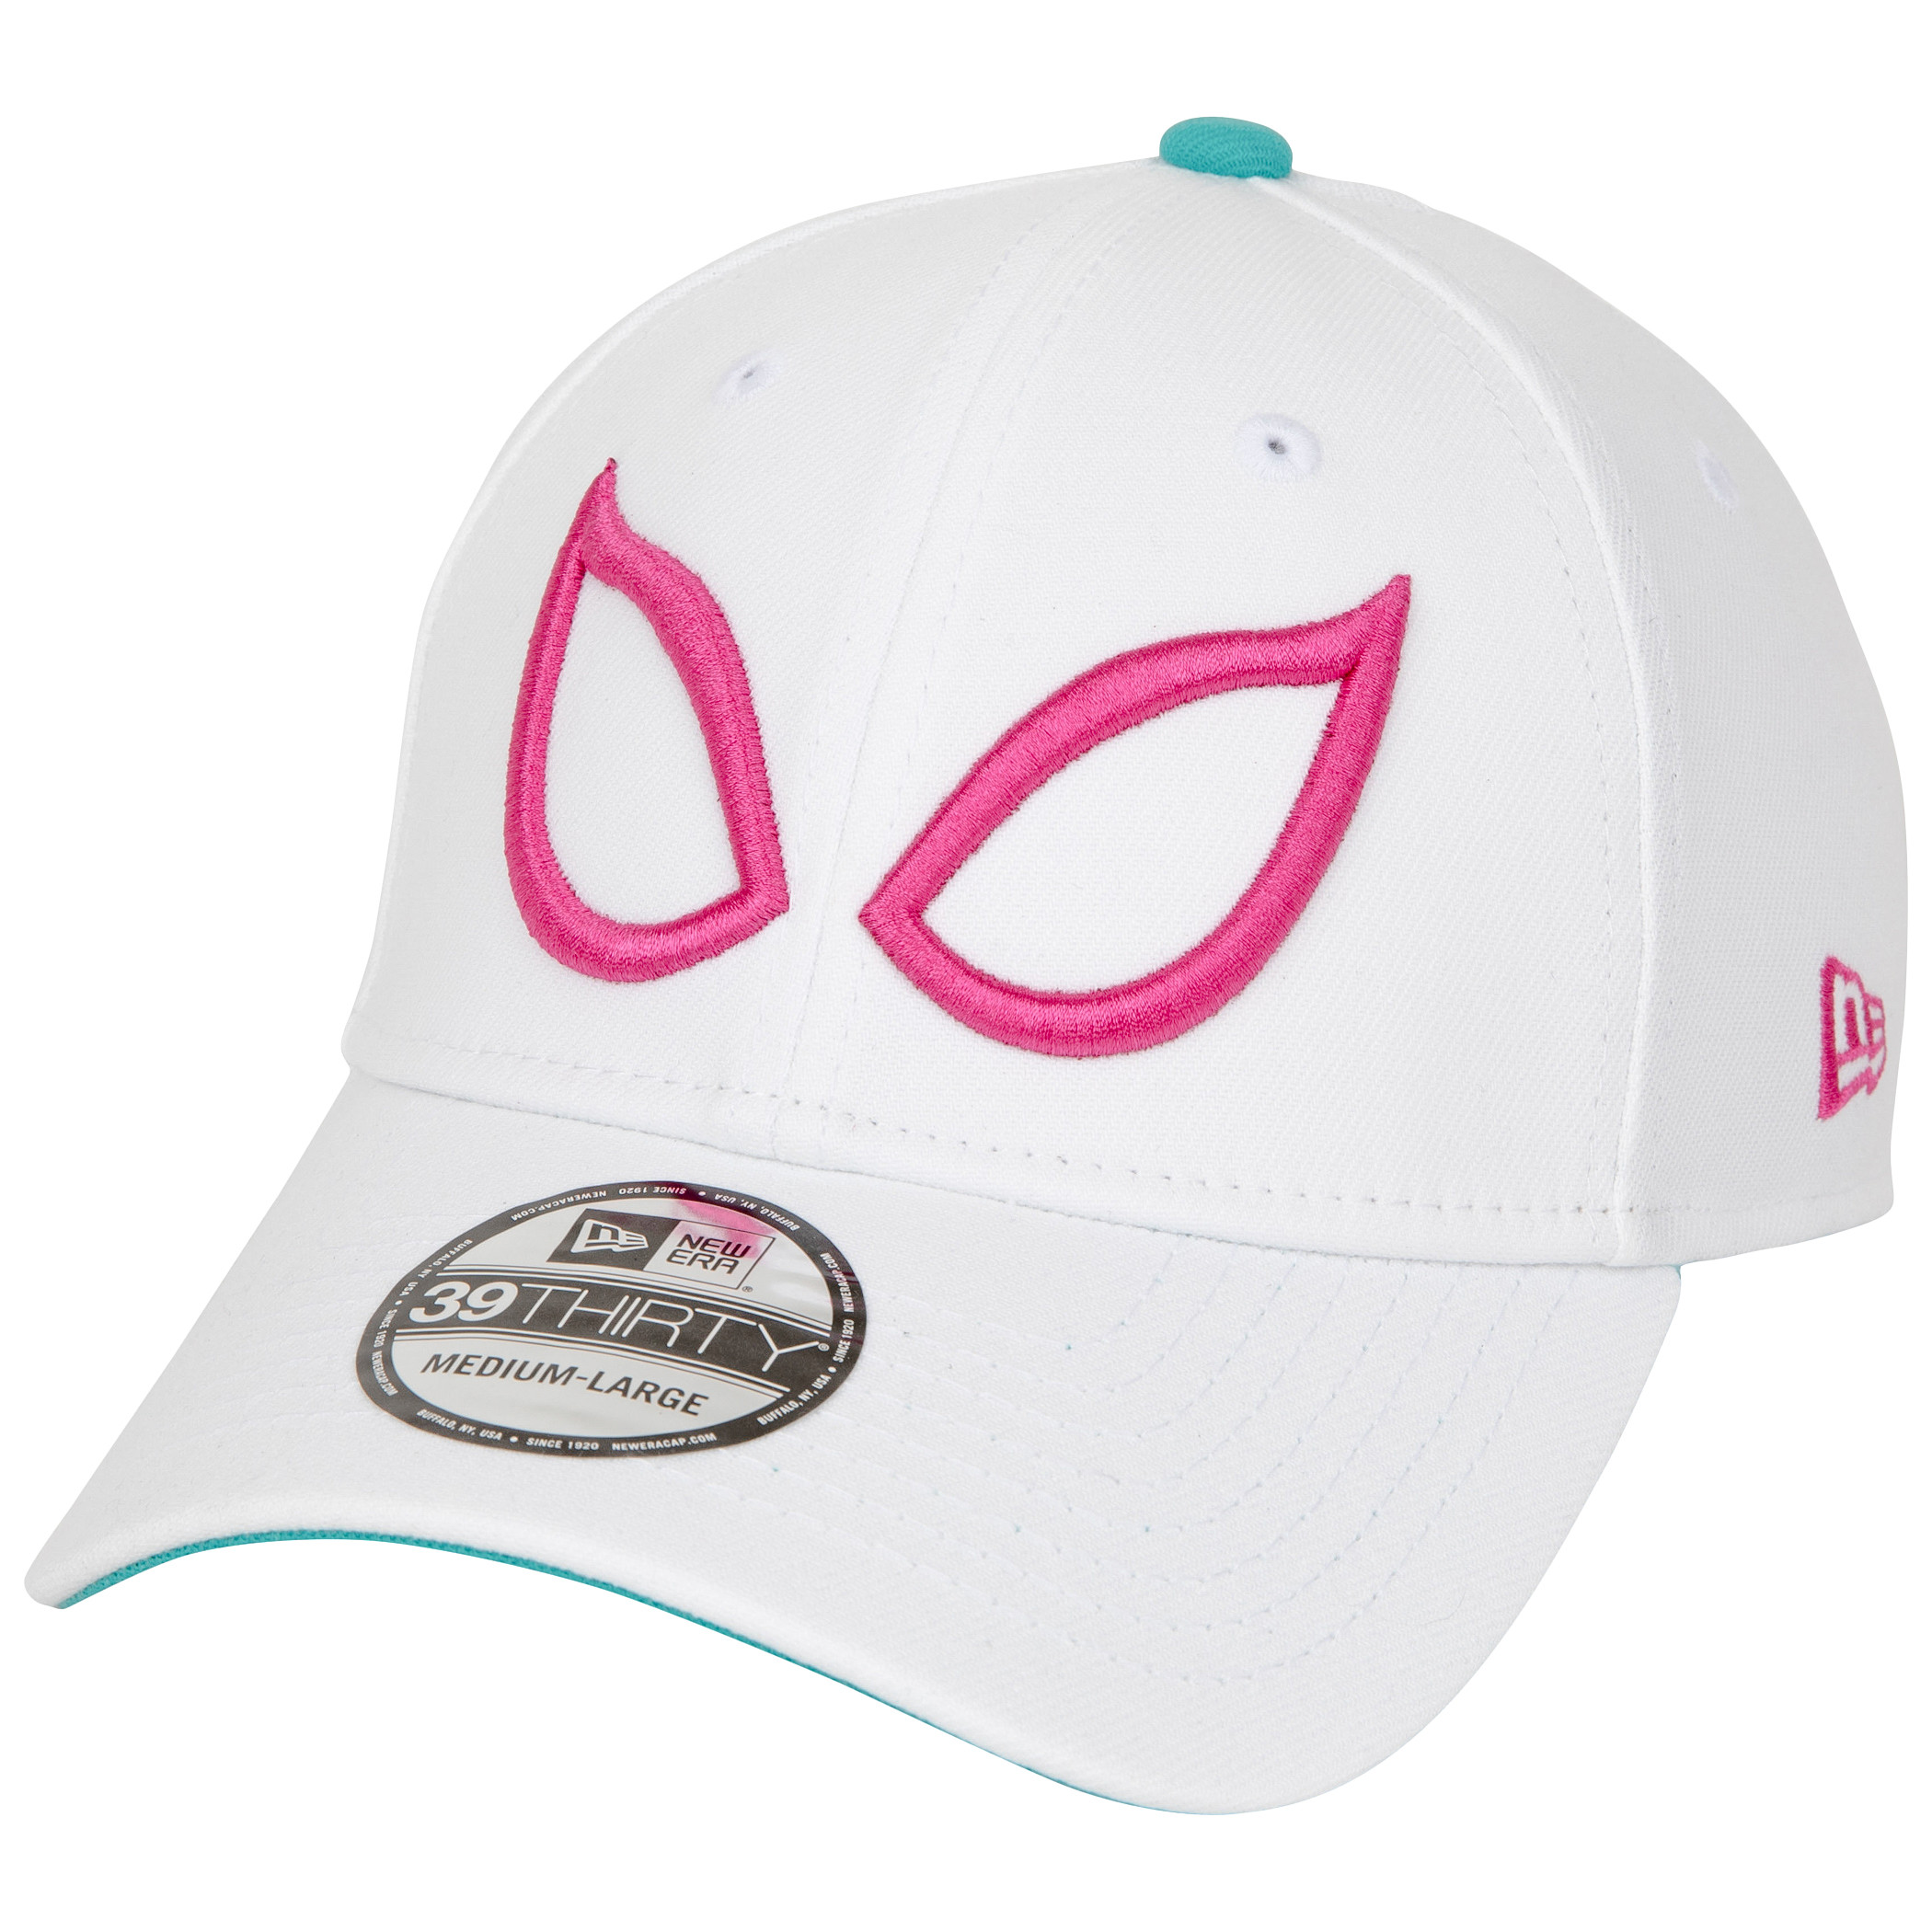 Spider-Gwen Character Armor New Era 39Thirty Fitted Hat